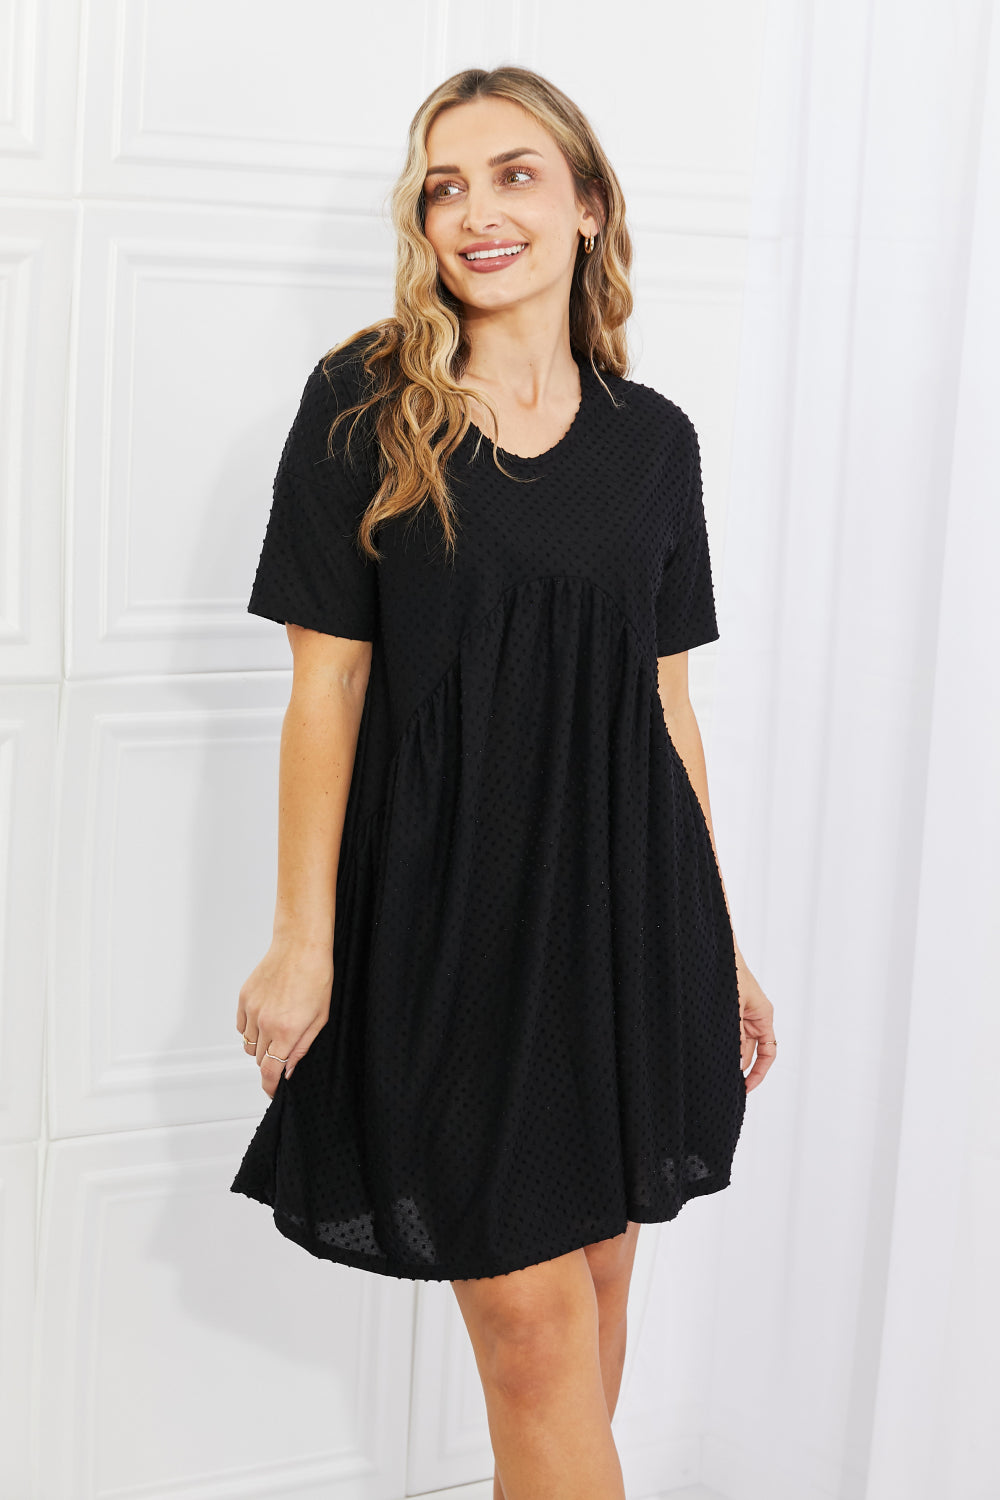 BOMBOM Another Day Swiss Dot Casual Dress in Black - The Fashion Unicorn